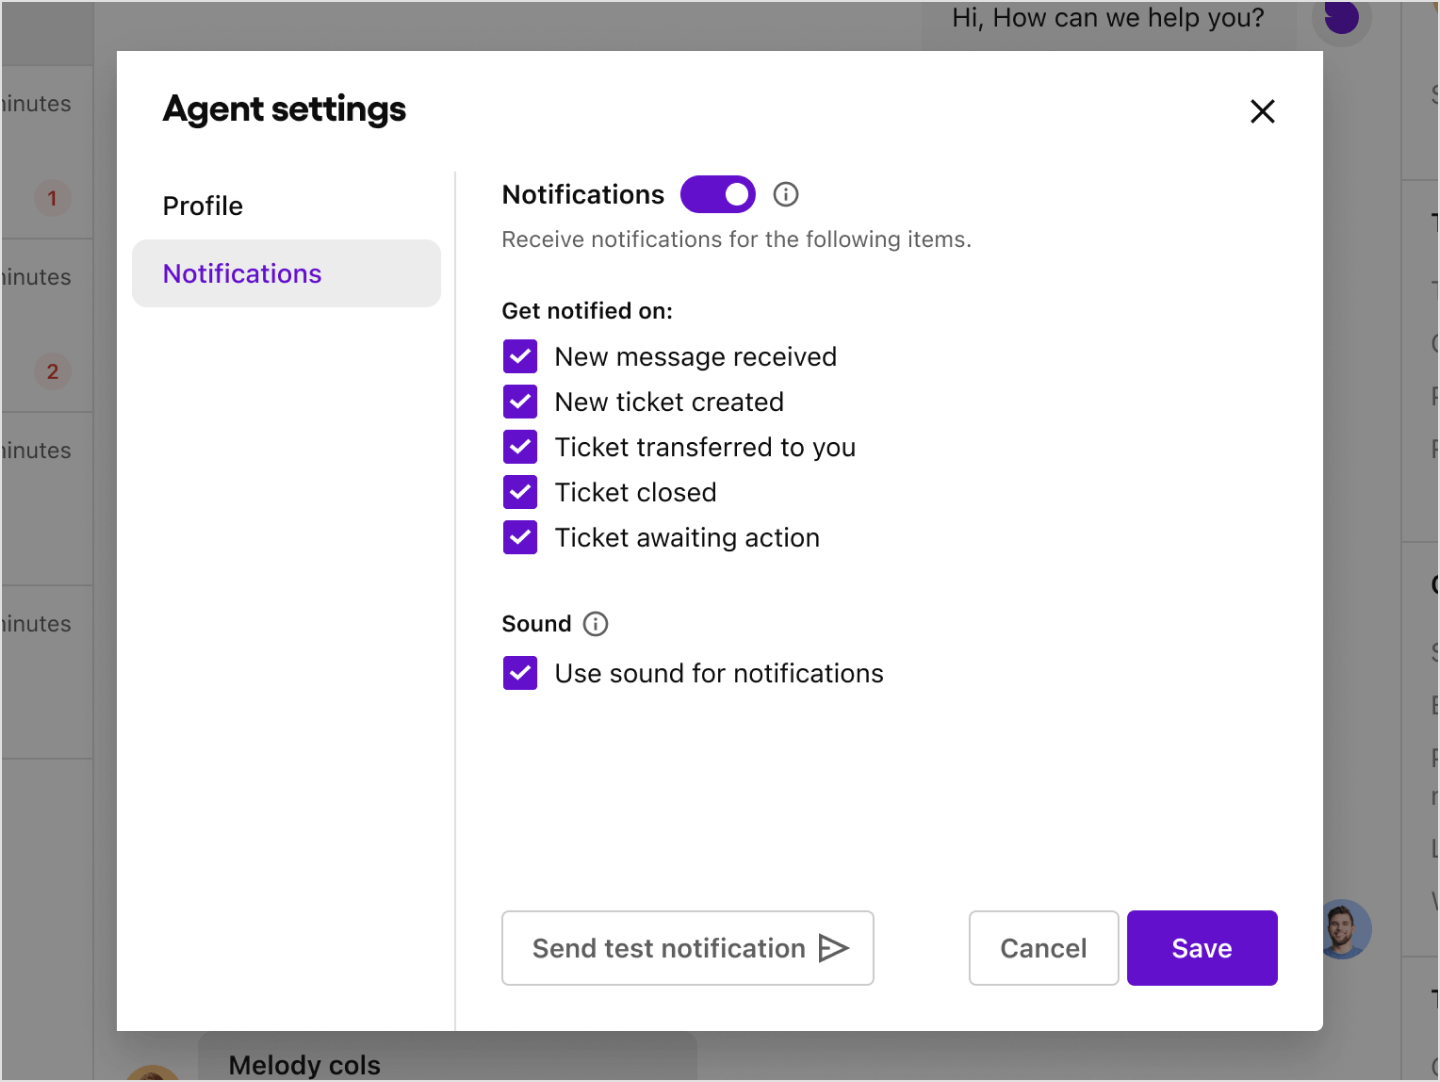 Image|Showing notifications settings page for agent